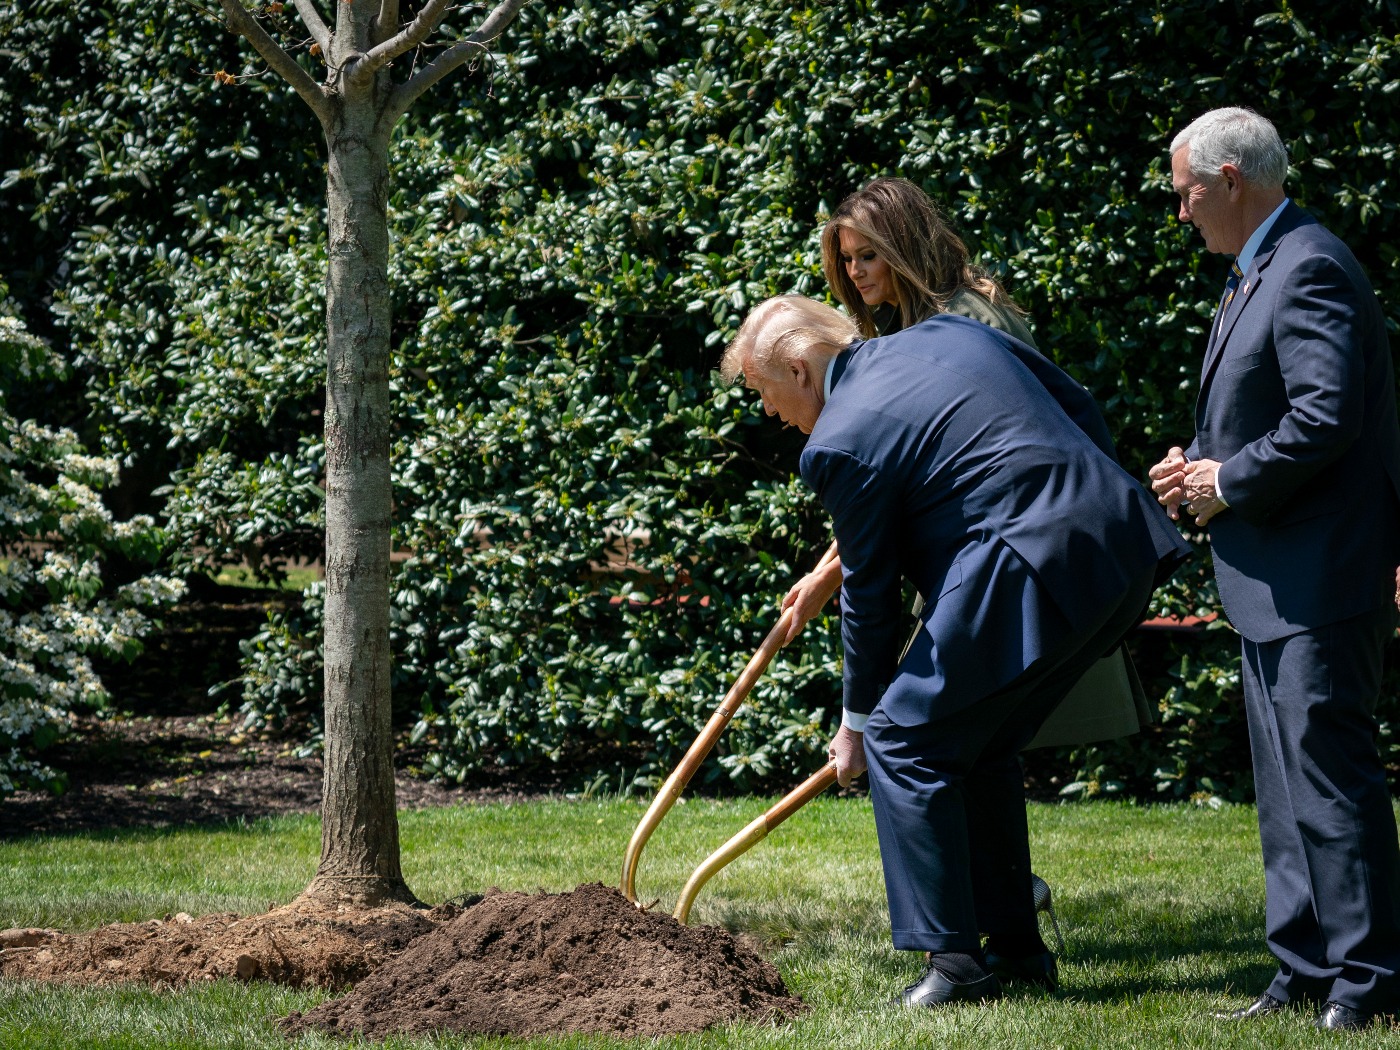 Trump and Melania shovel dirt in a green lawn wearing a suit and dress.